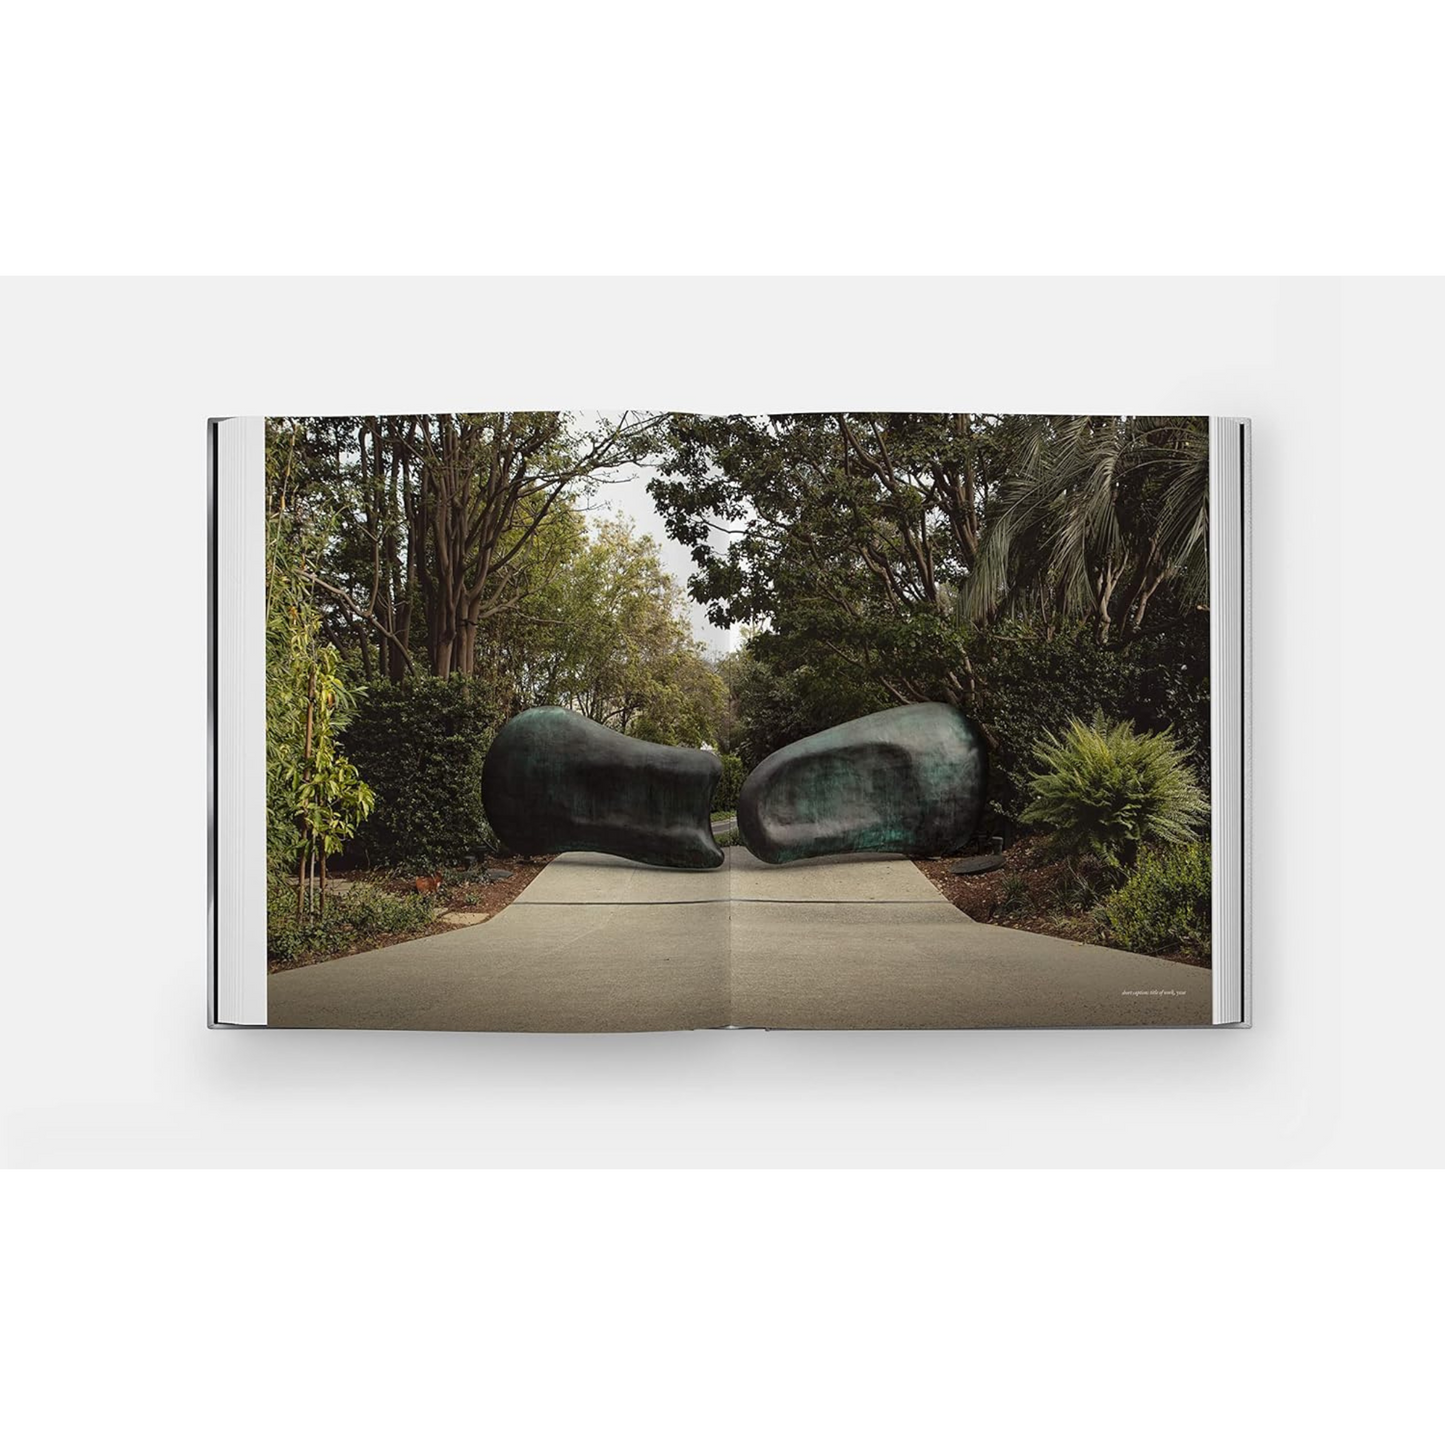 Internal double page spread of outdoor sculpture.